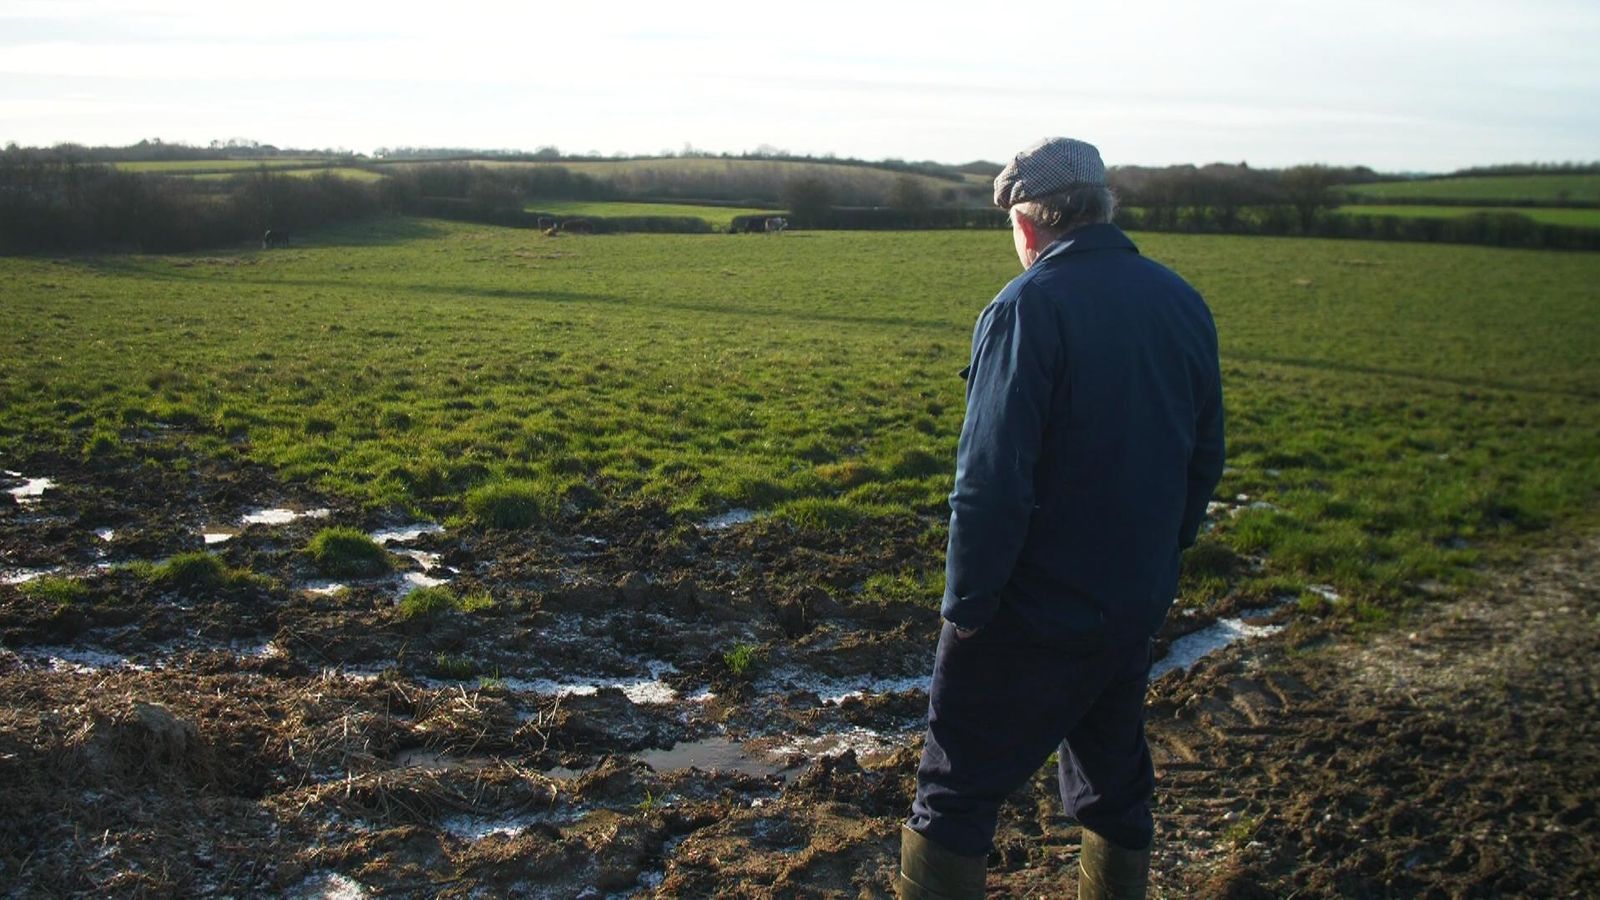 'Life would never be the same again': The tenant farmers targeted by solar developers